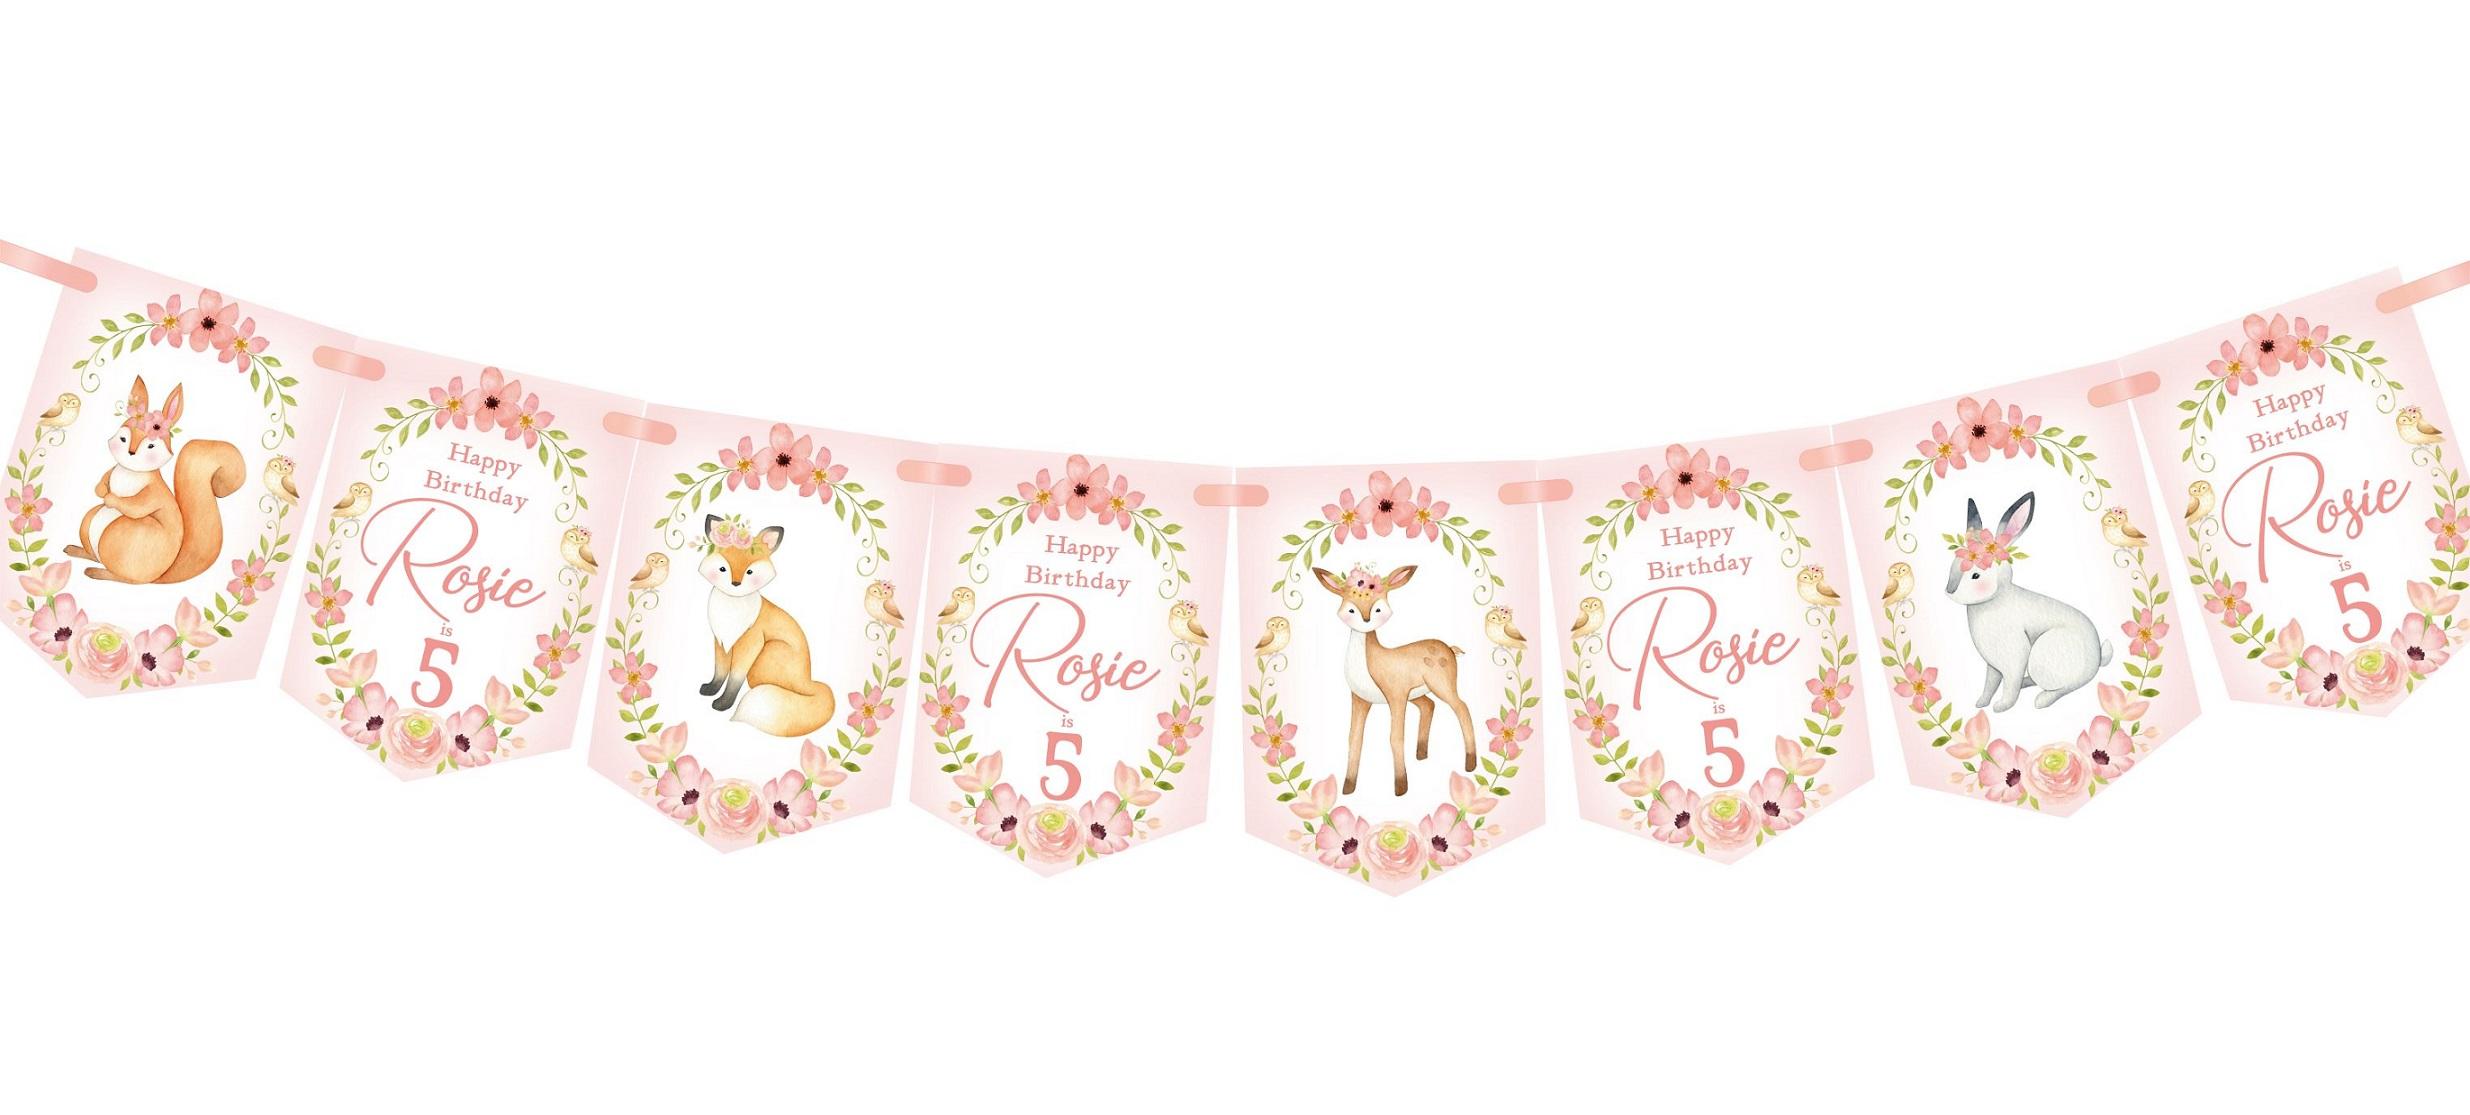 Childrens Birthday Bunting, Banner,Kids Birthday Party Decorations,Any Age,Woodland Forest Animals